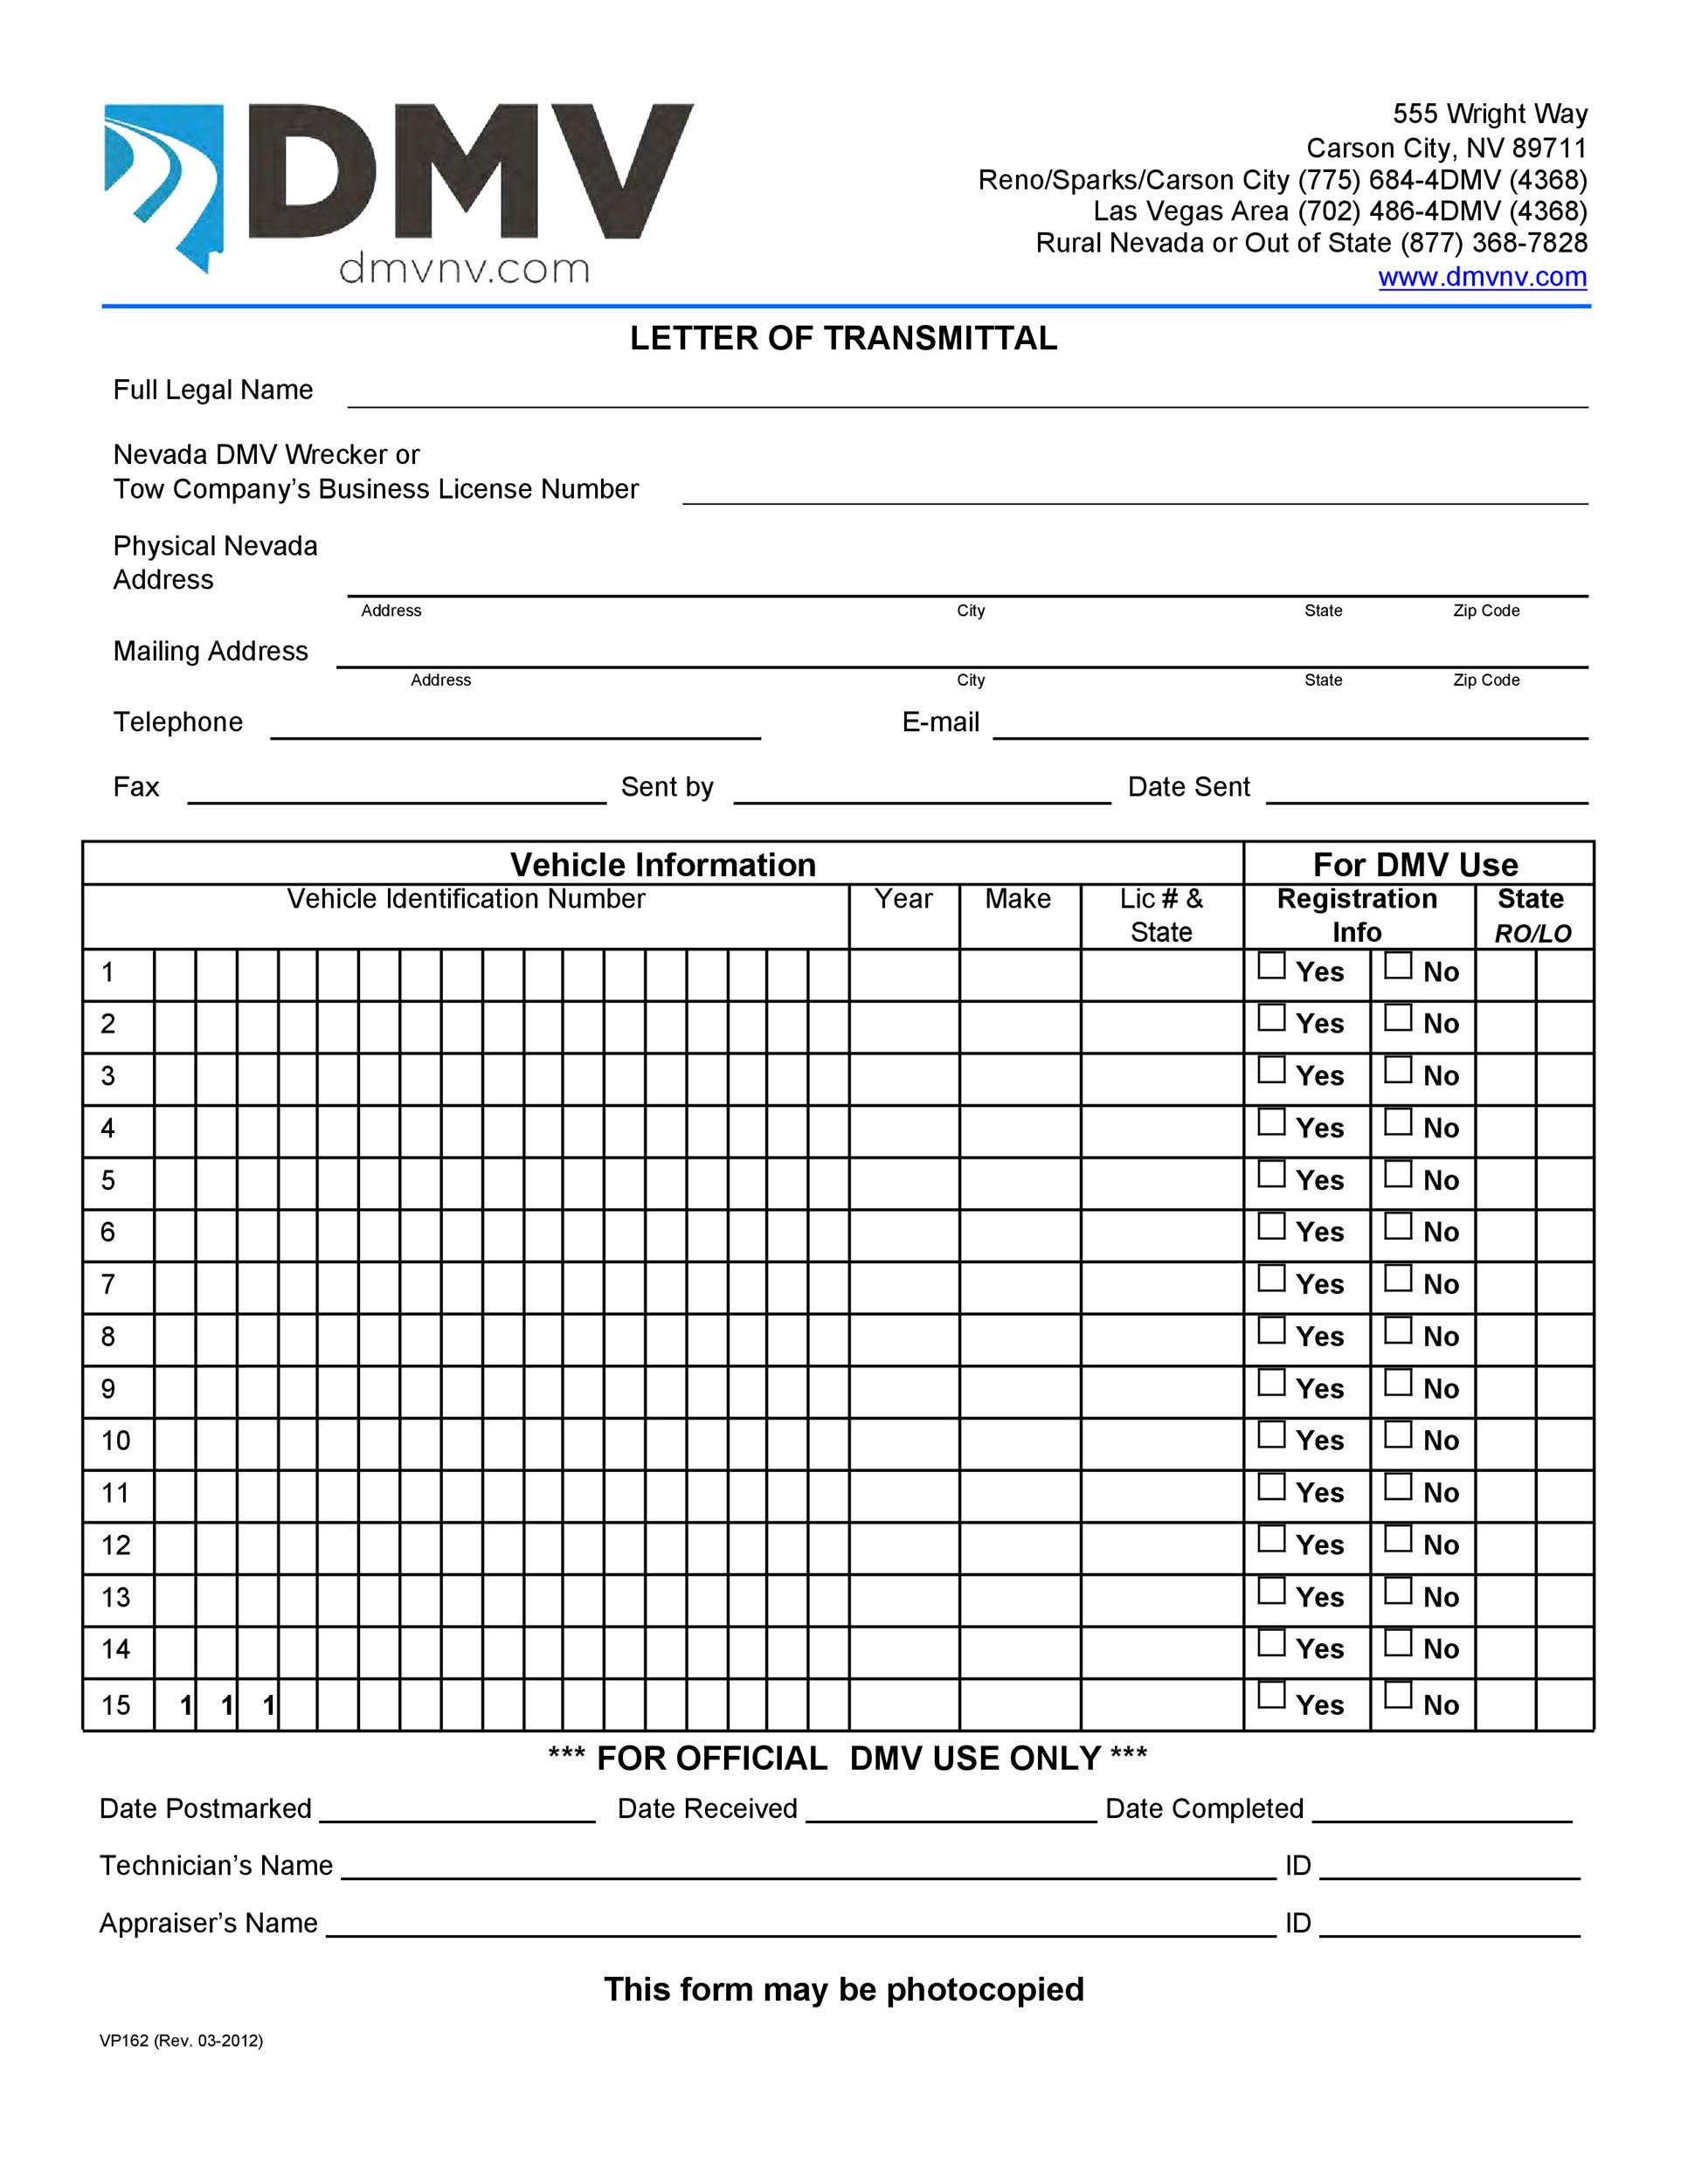 letter-of-transmittal-40-great-examples-templates-templatelab